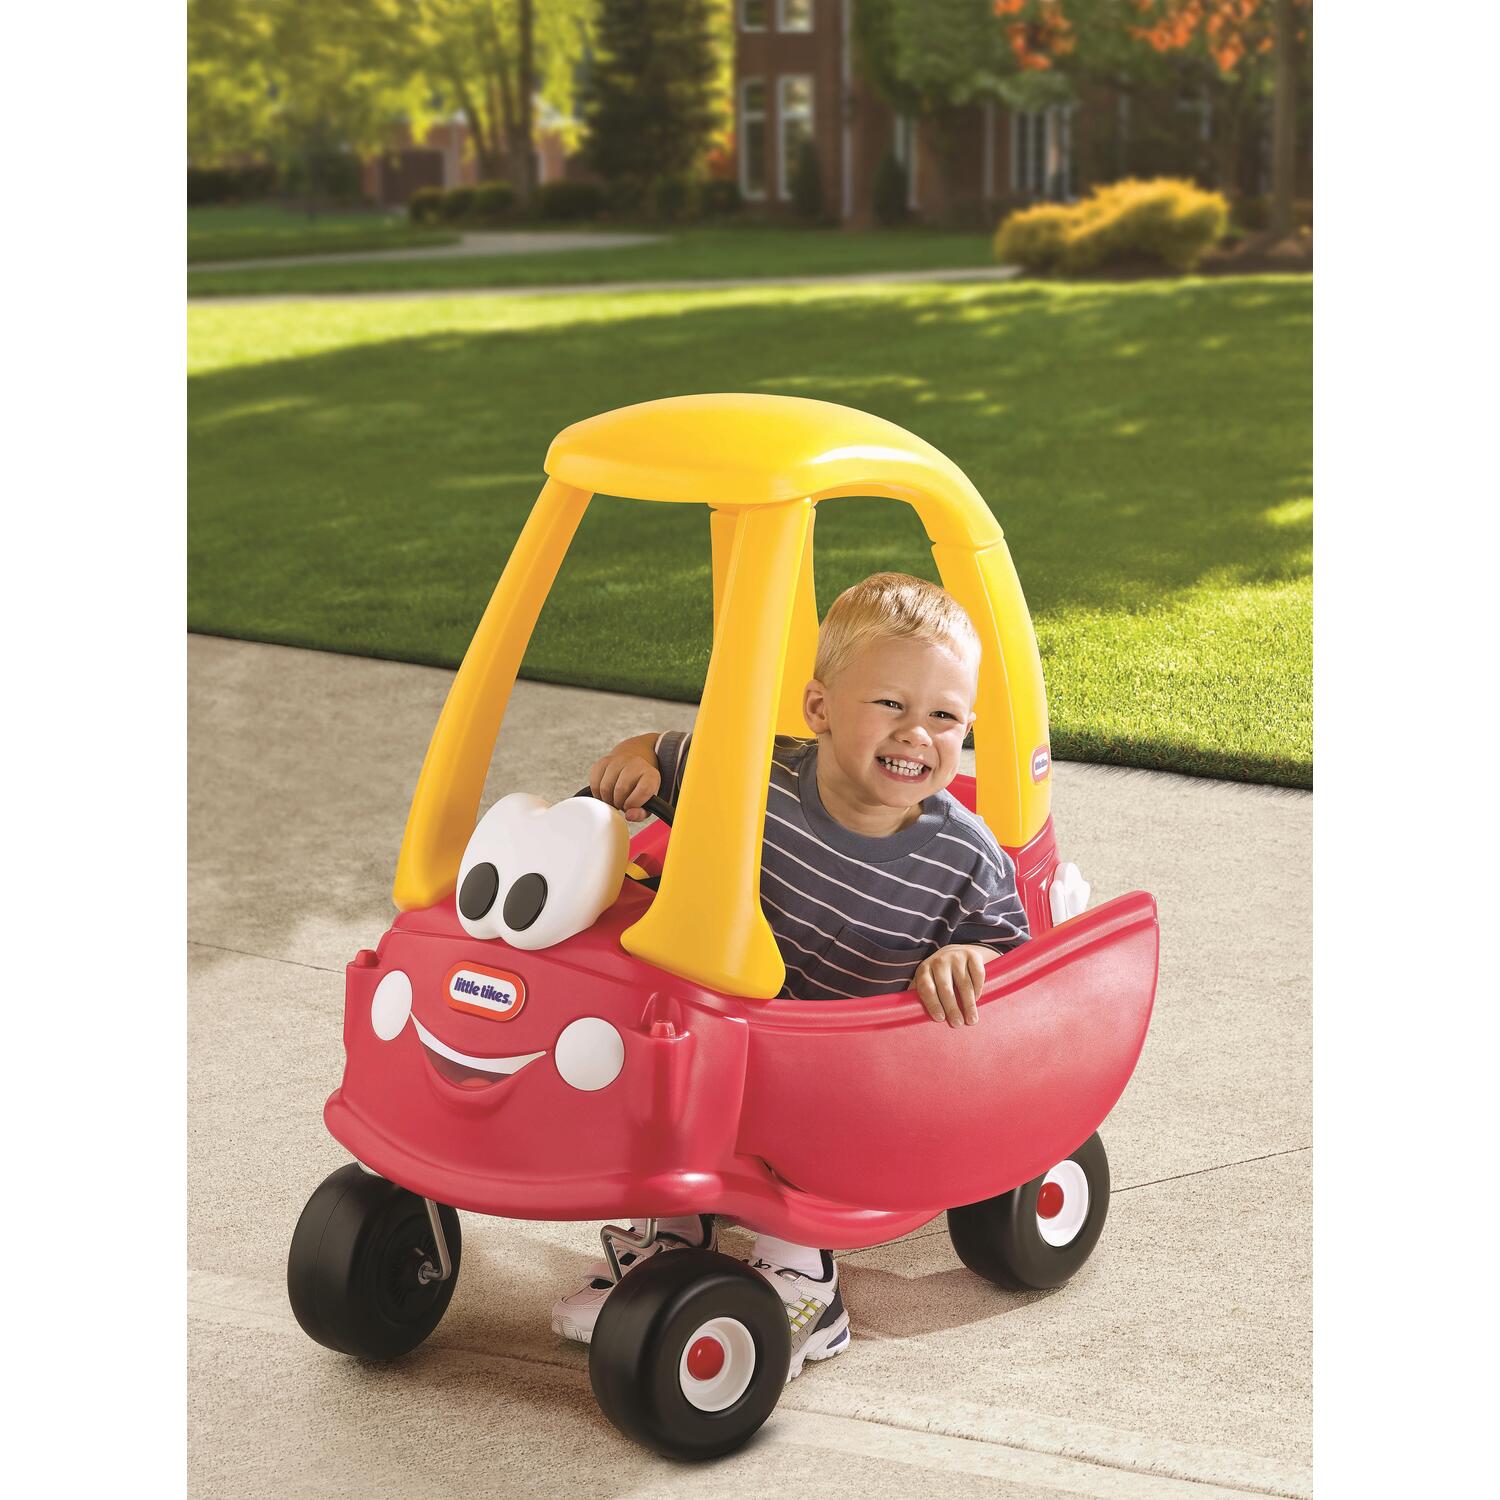 Little Tikes Cozy Coupe 30th Anniversary Edition Ride on - image 3 of 11